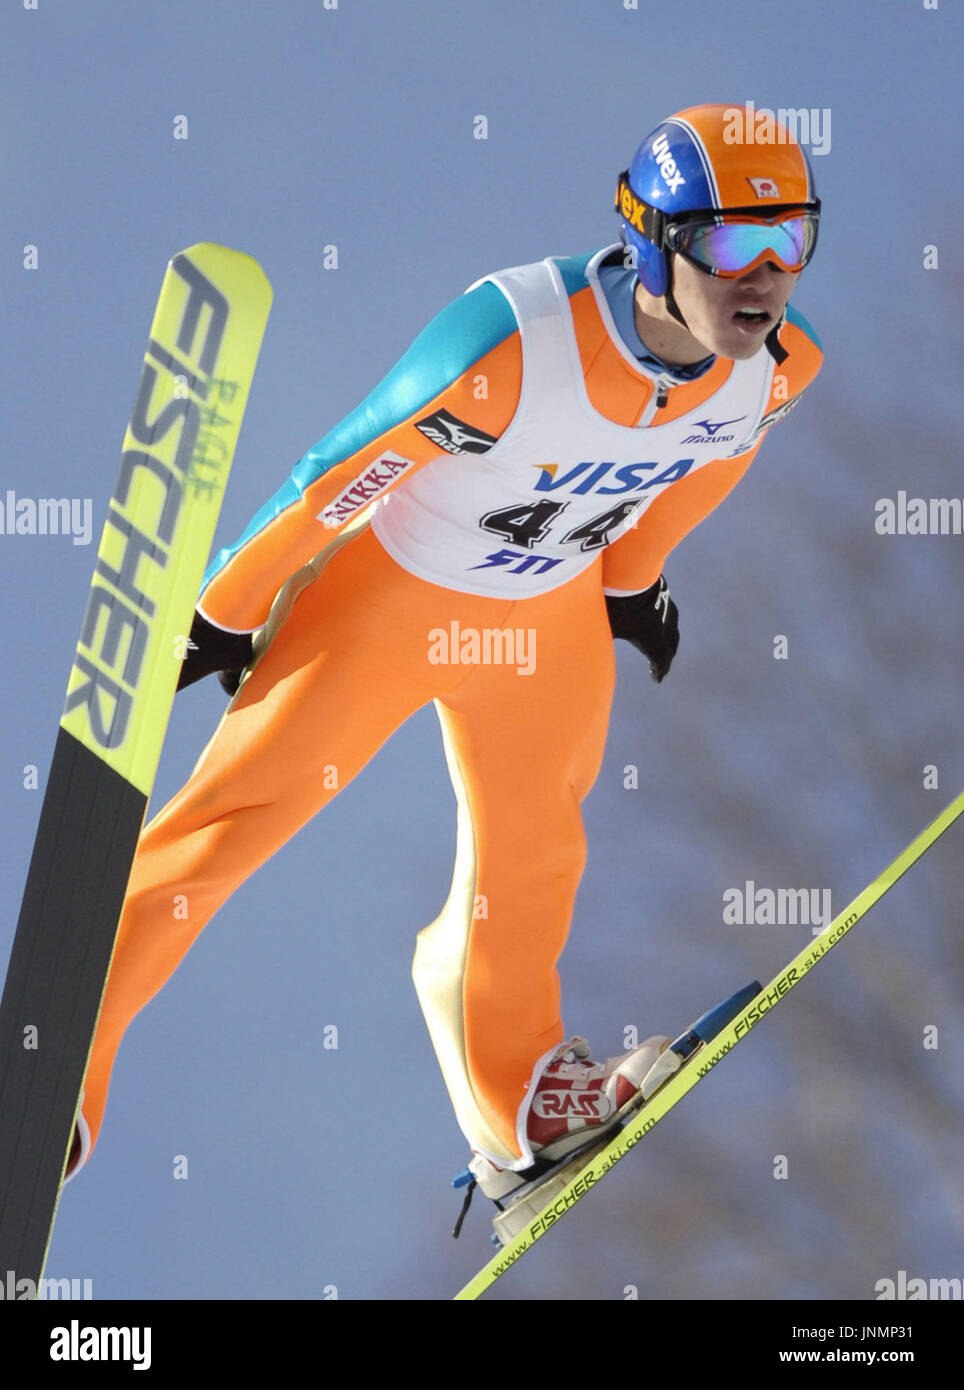 SAPPORO, Japan - Veteran ski jumper Akira Higashi held off two European  rivals to win his first STV Cup title in 14 years on Jan 14. Higashi earned  a total of 253.8